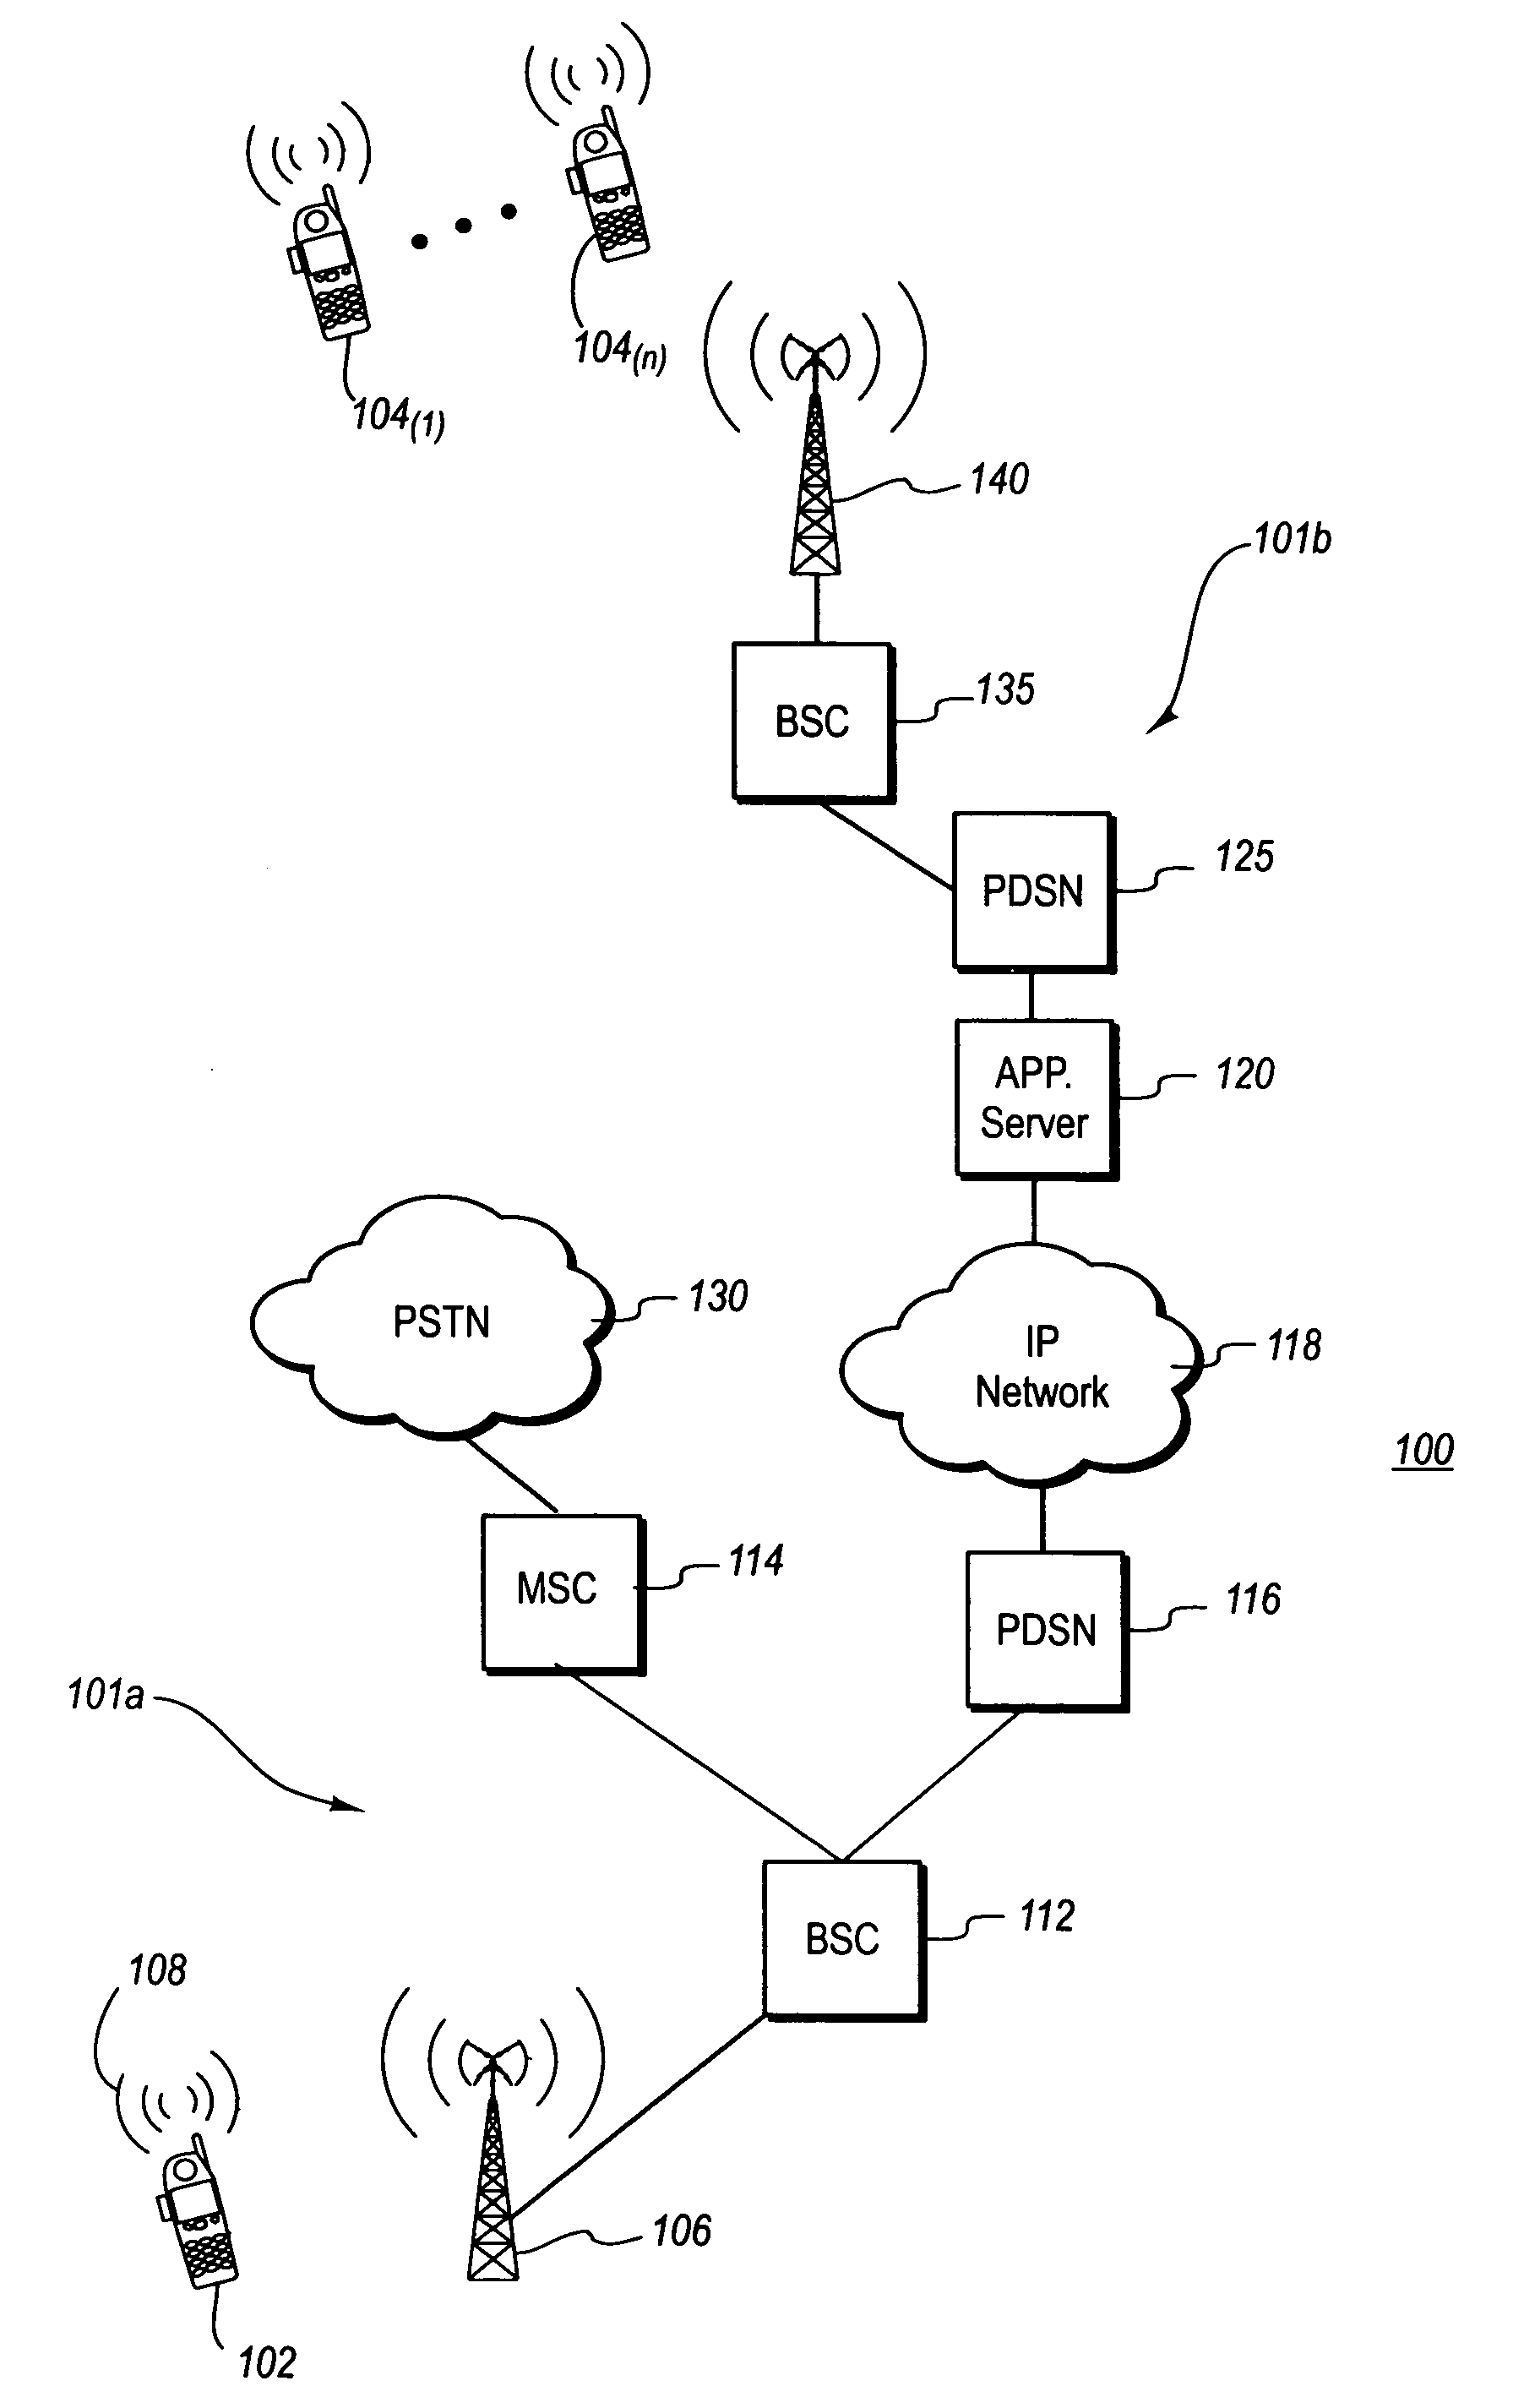 Load balancing between users of a wireless base station